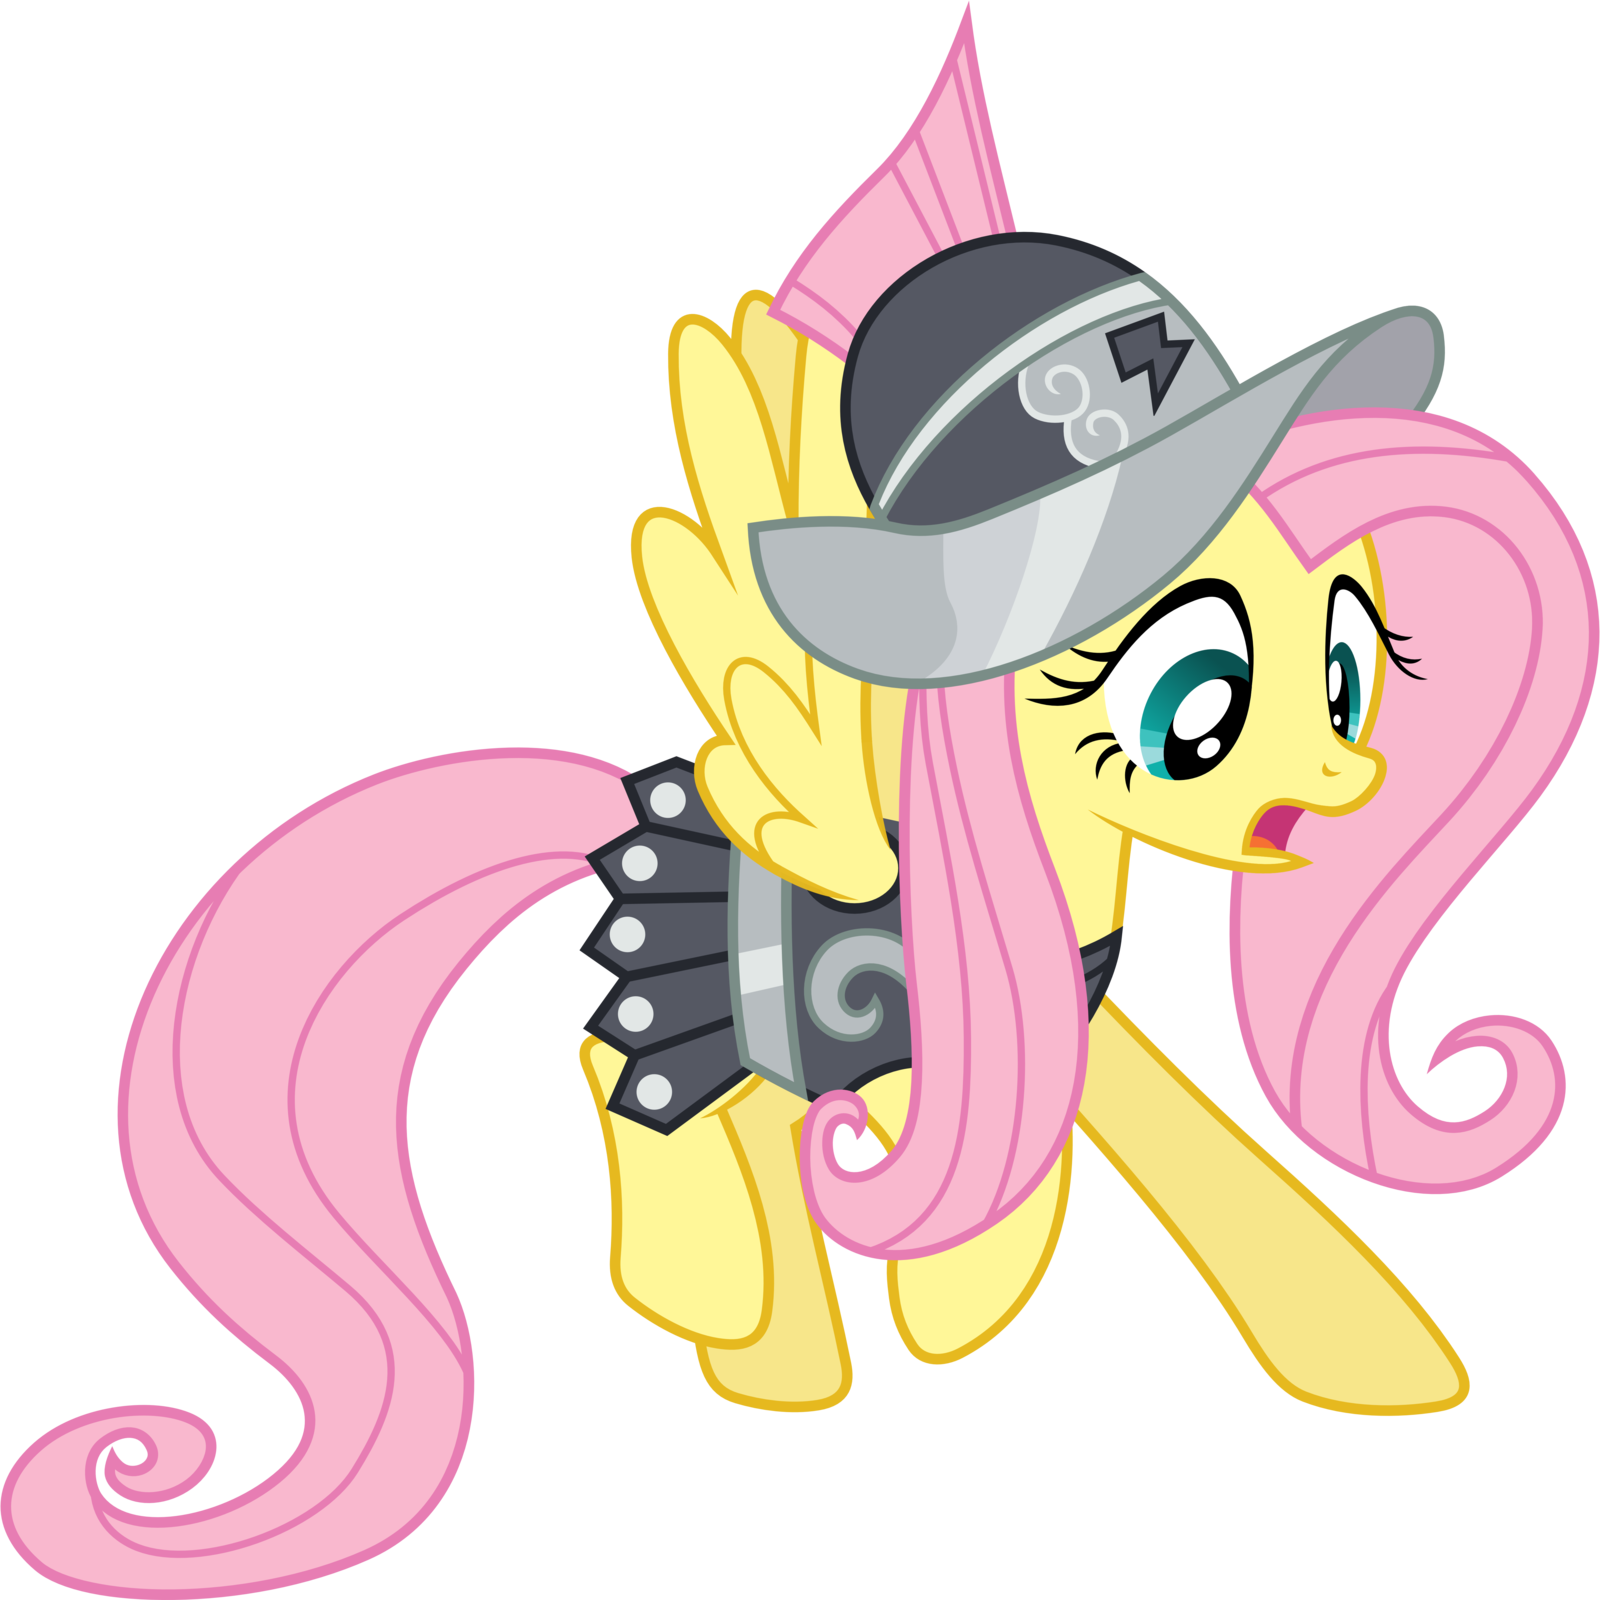 Commander Hurricane By Emptymask D5sqat7 Private Pansy - My Little Pony Private Pansy (1600x1600)